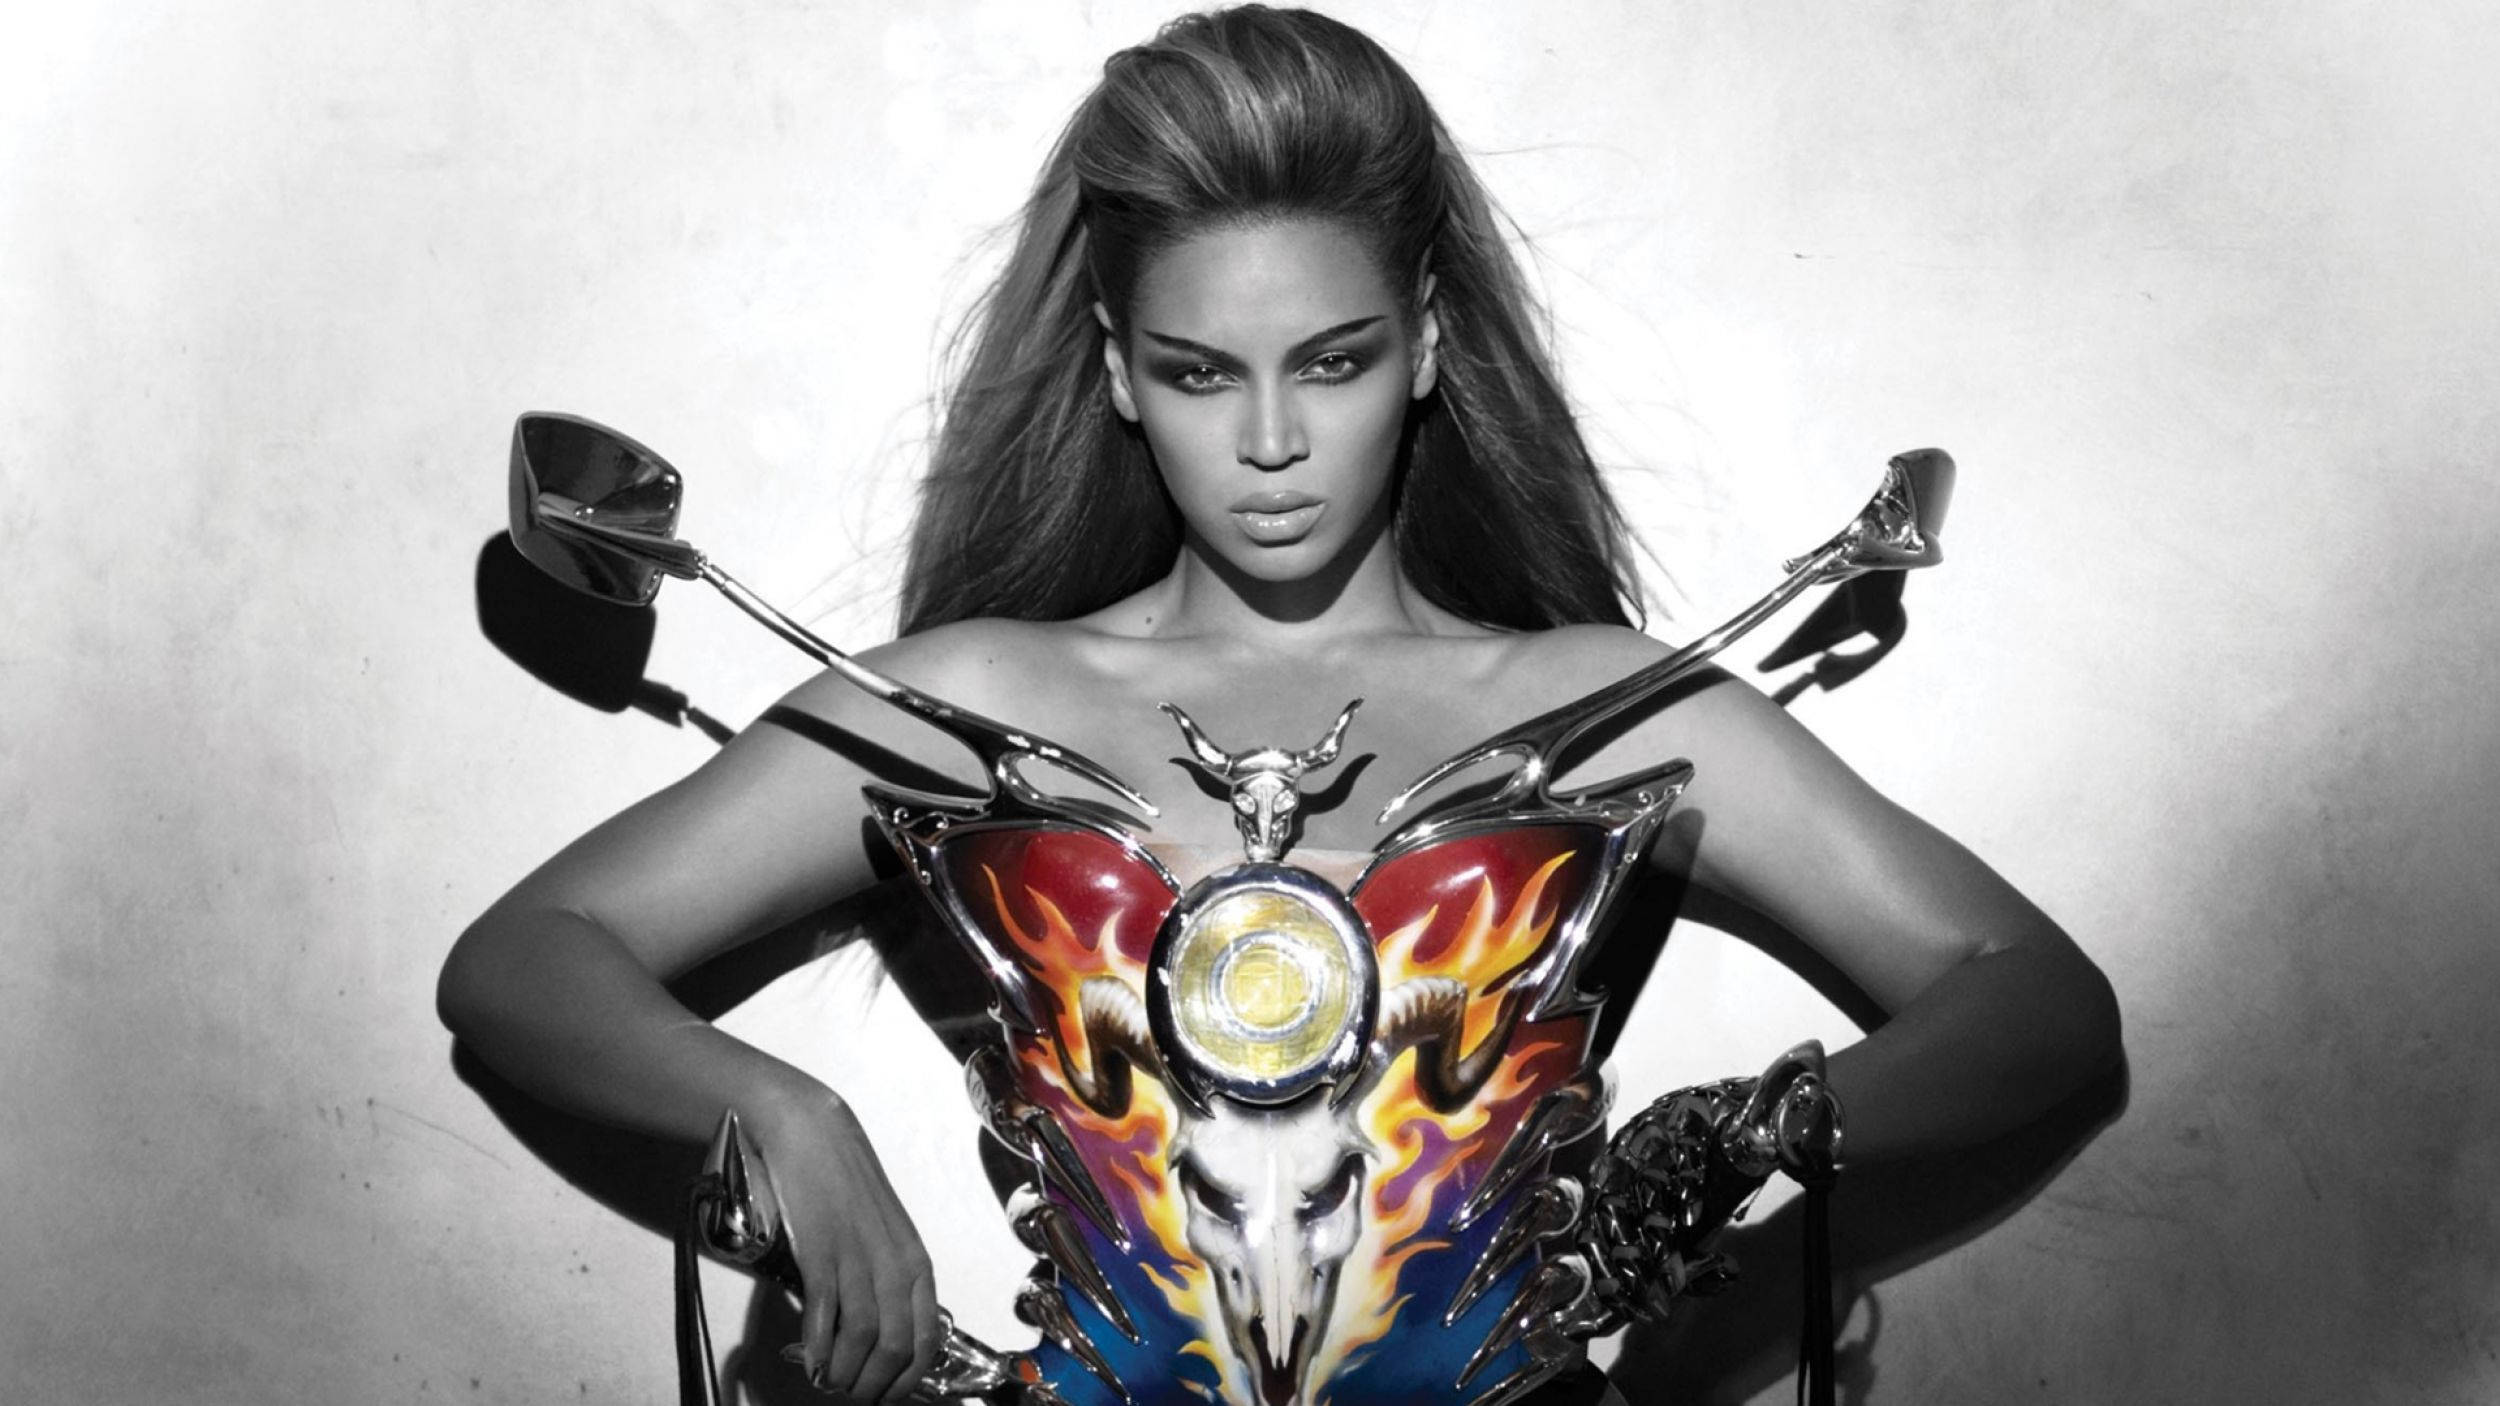 Download Beyonce In Punk Motorcycle Outfit Wallpaper